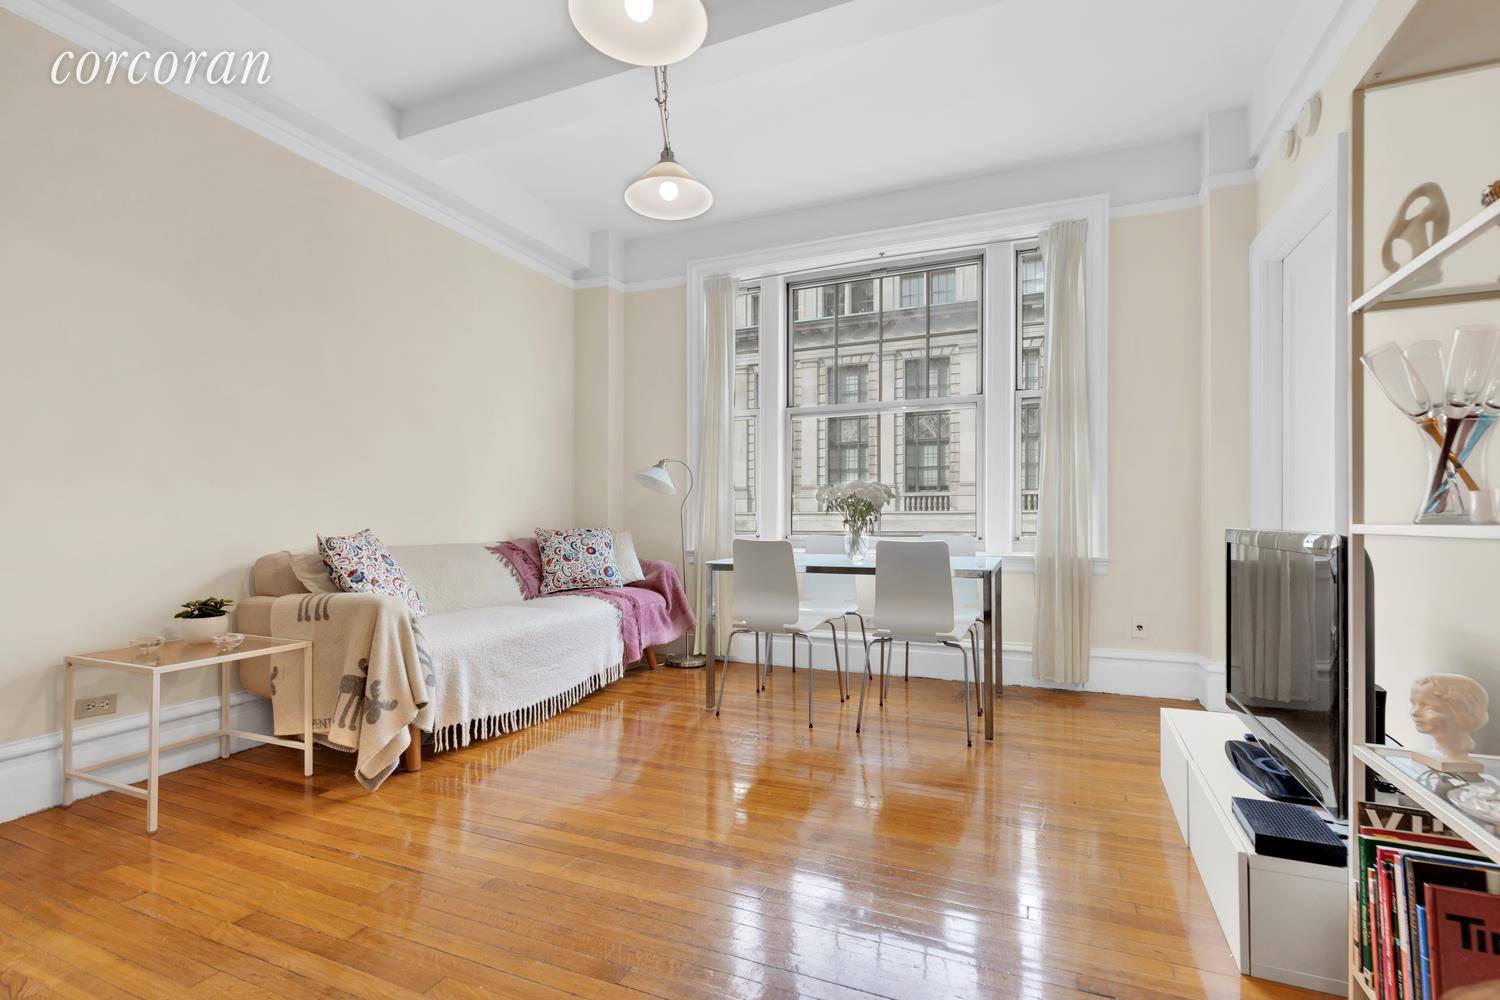 Apartment 707 at The Berkley, 170 West 74th Street, is a spacious one bedroom home with high ceilings, oversized windows, and an abundance of light and charm.